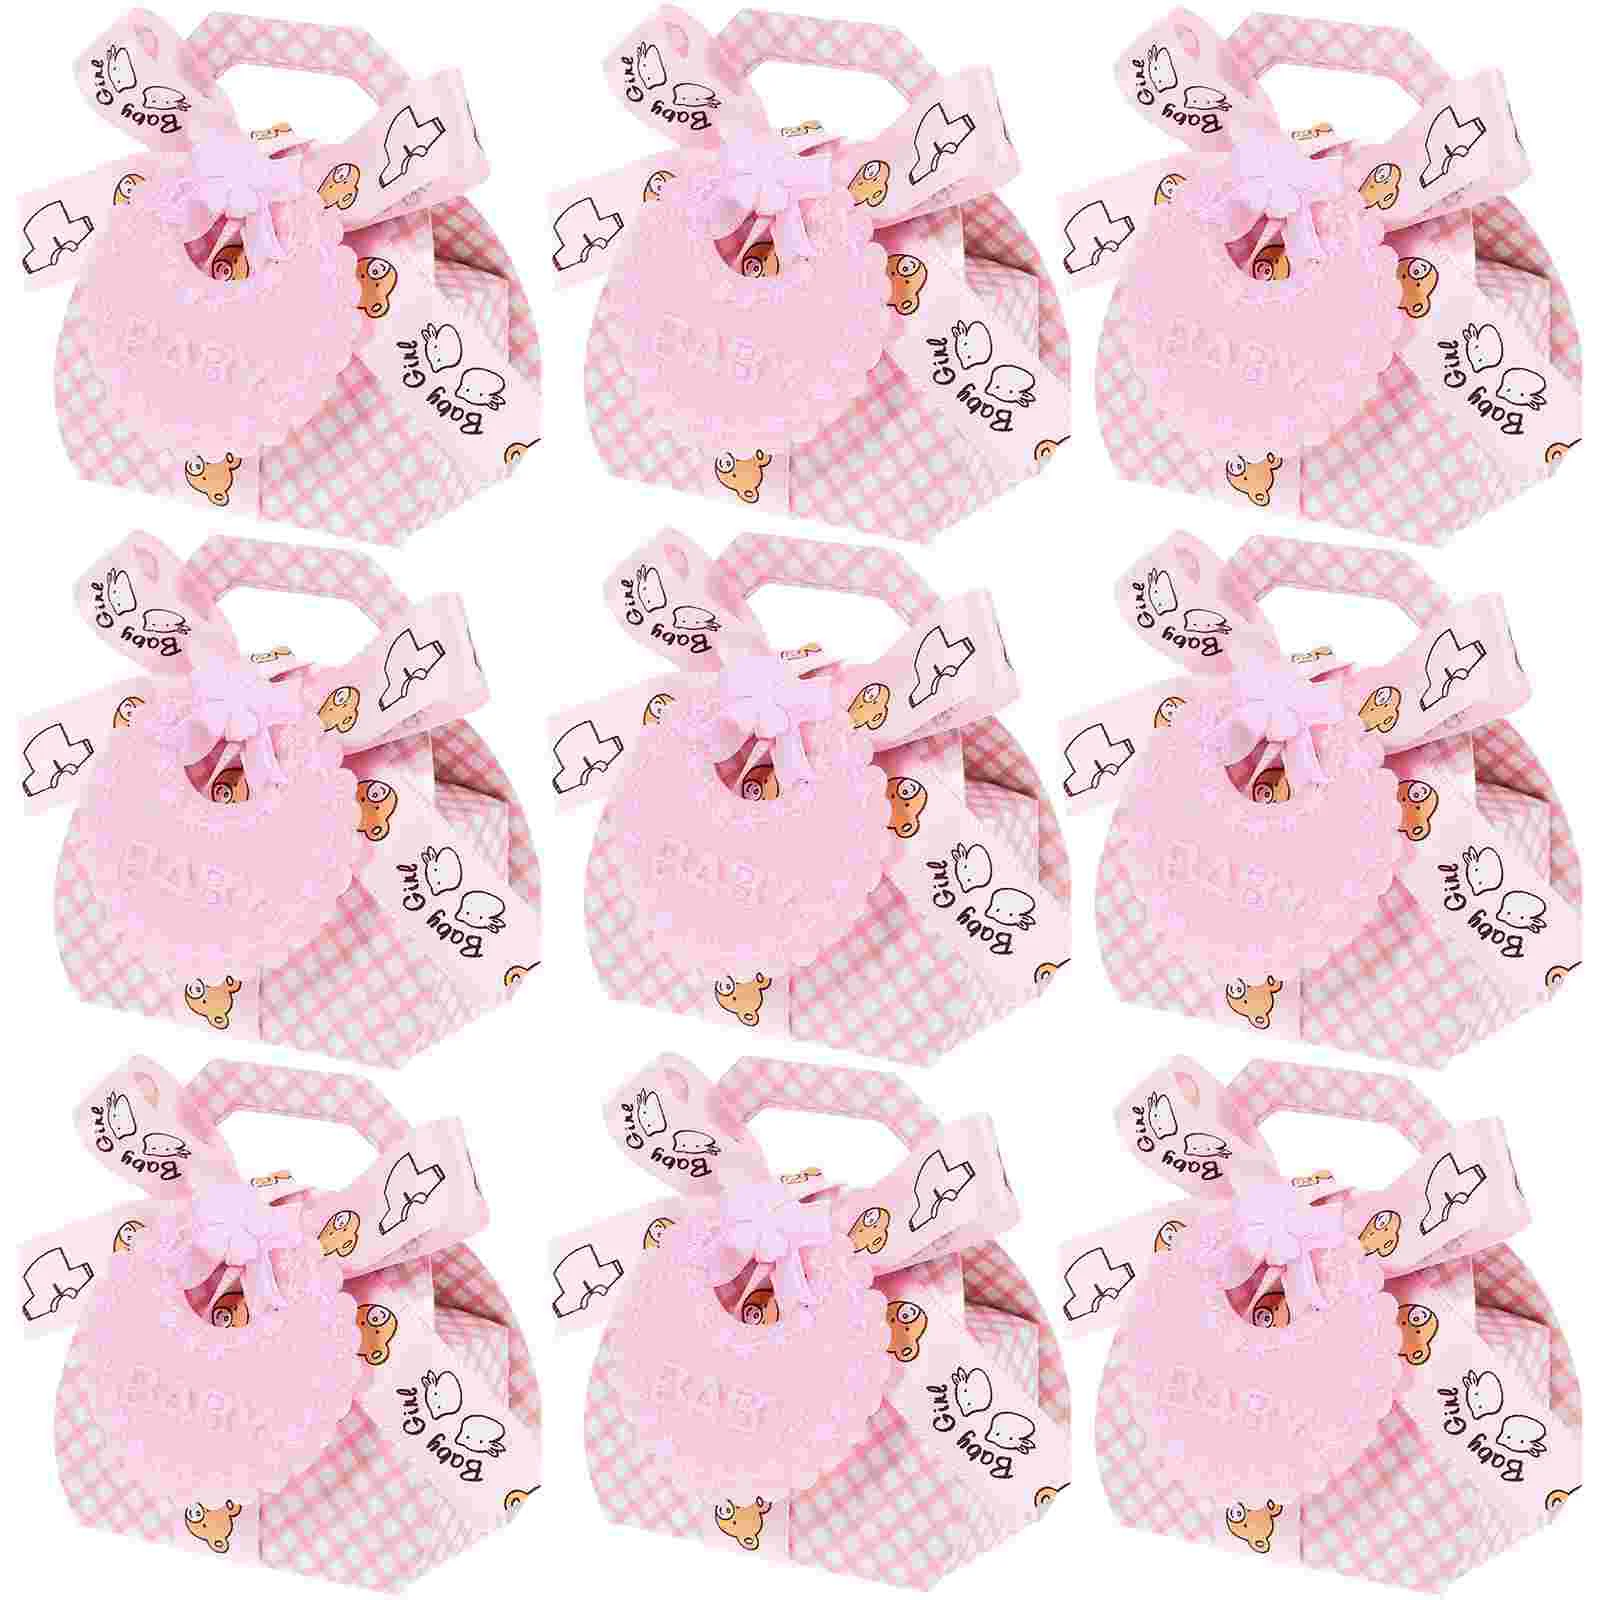 

12 Pcs Adorable Cases Wedding Candy Container Baby Bibs Supplies Party Treats Containers Bear Pattern Small